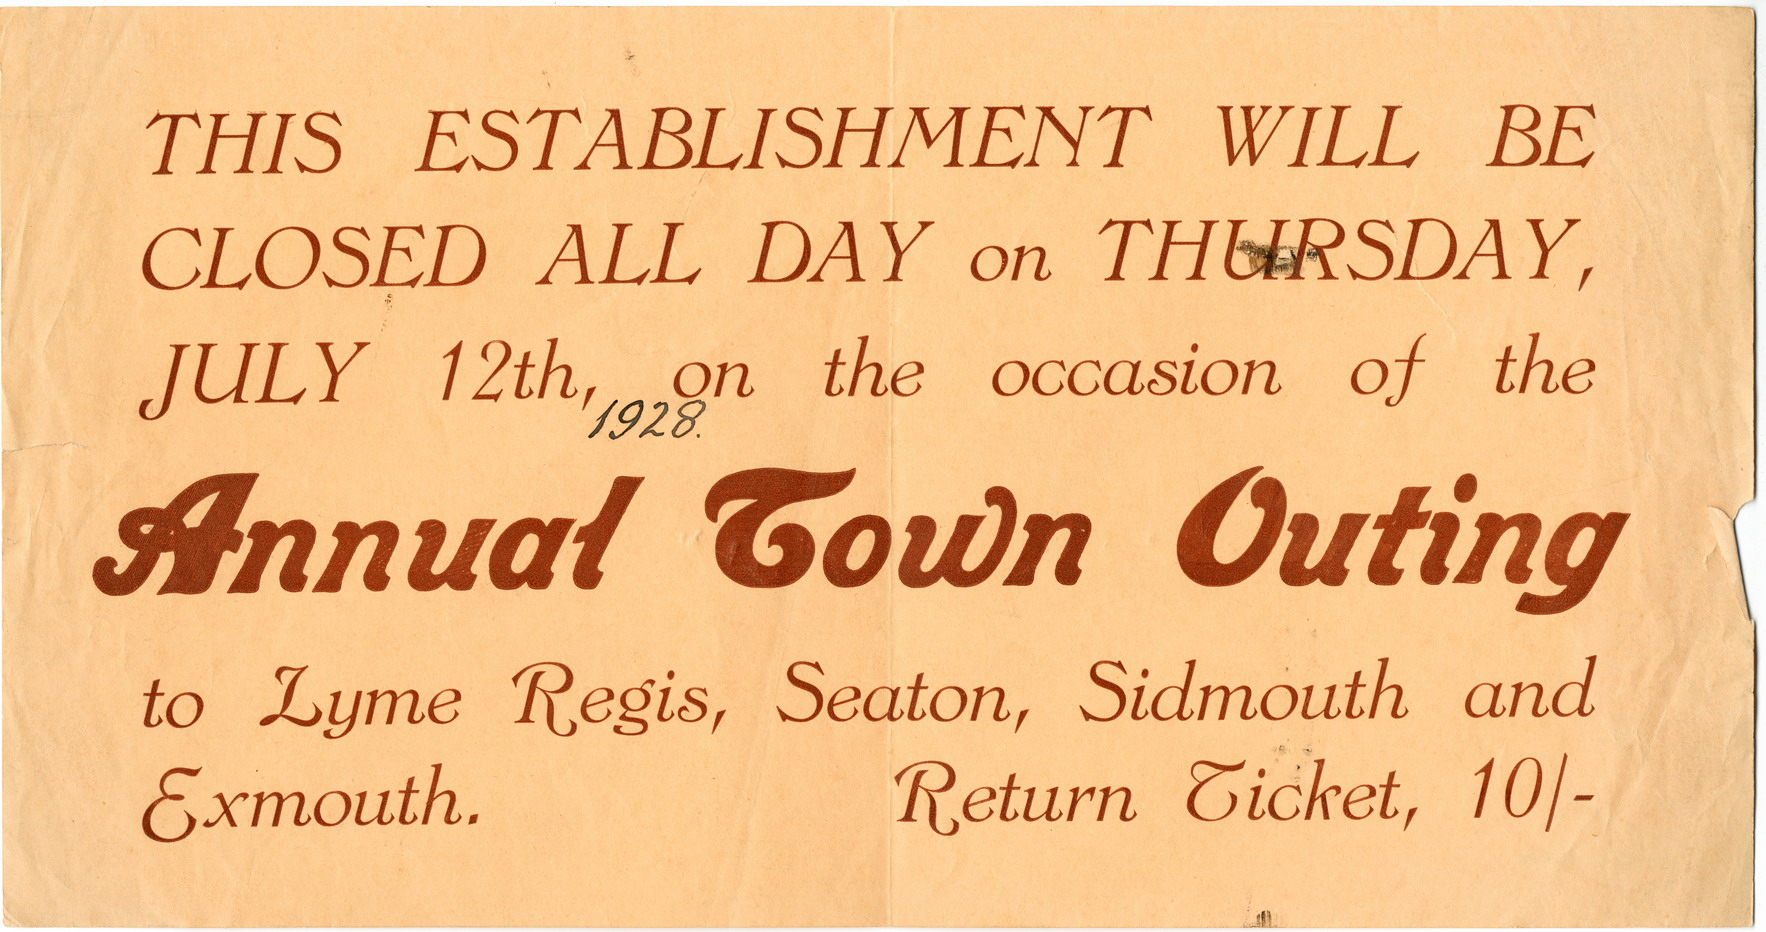 A notice for the 1928 Annual Town Outing organised by Horsham Chamber of Trade